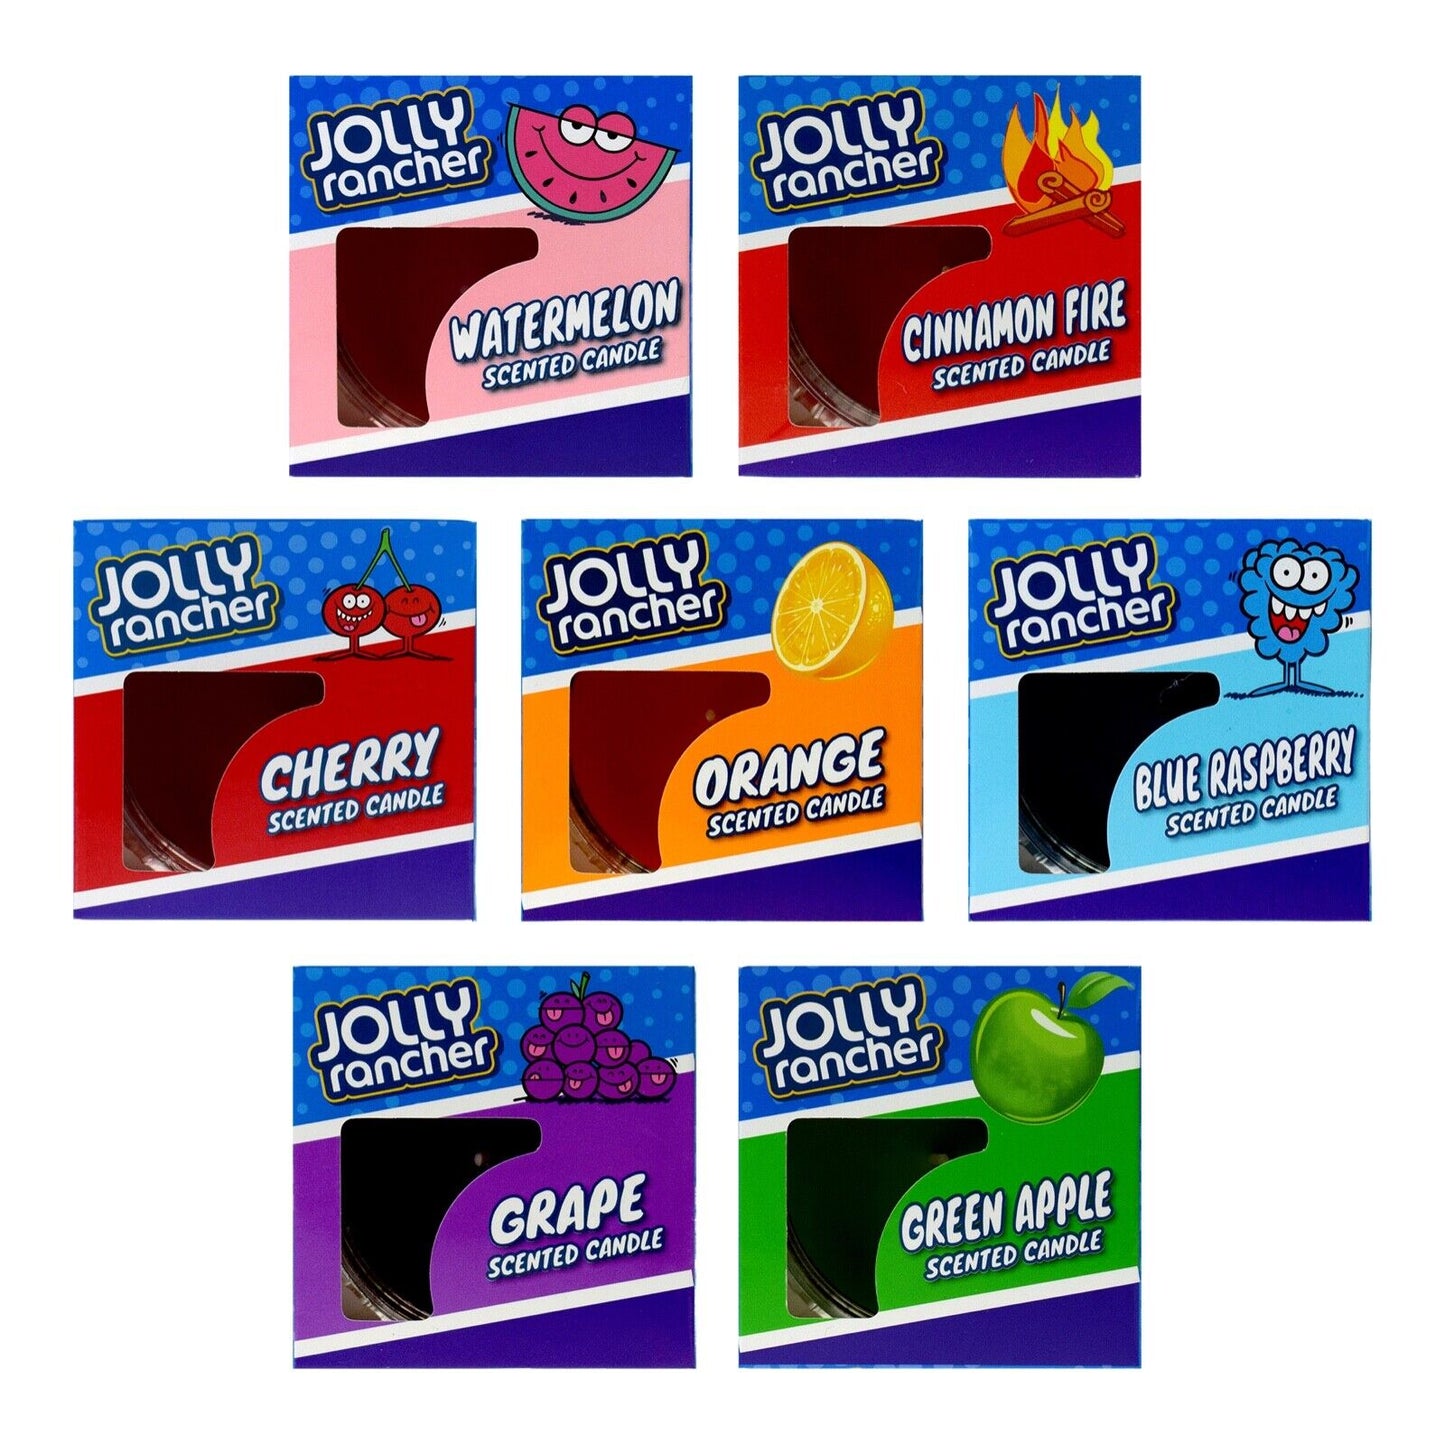 3 MIXED Jolly Rancher 85g Scented Candles